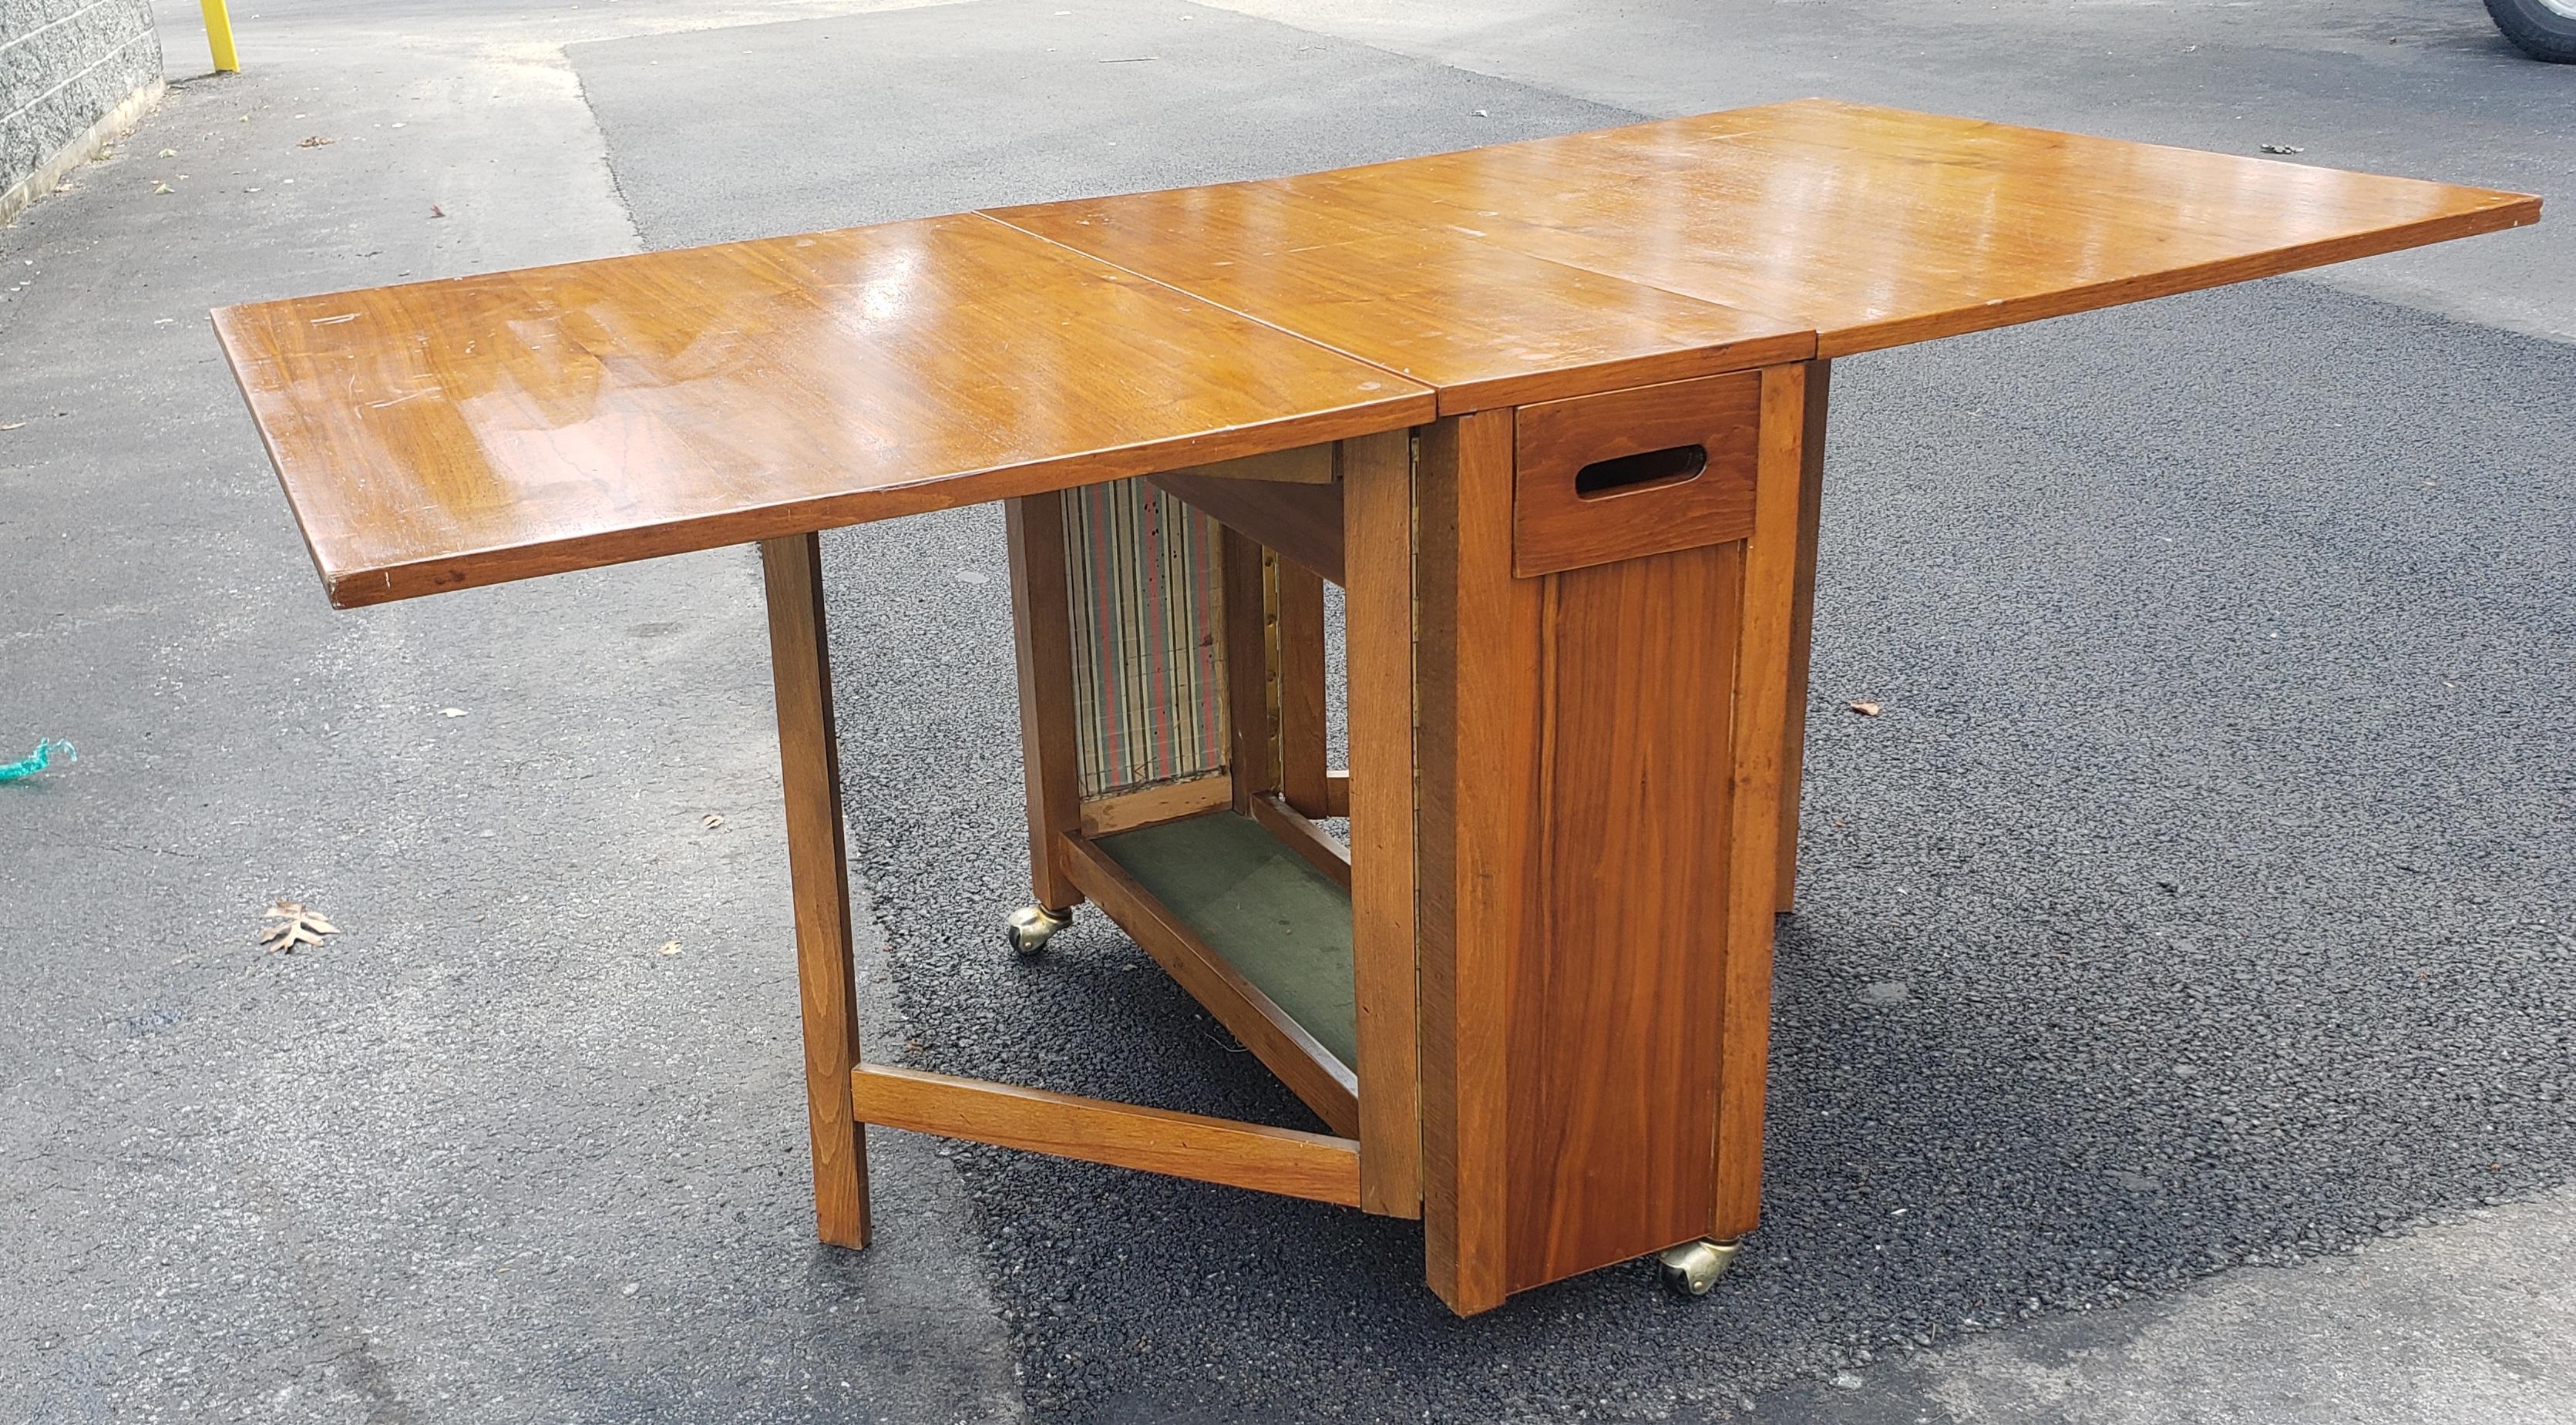 Stained Mid-Century Danish Modern Teak Drop-Leaf Dining Table with Storage on Rollers For Sale